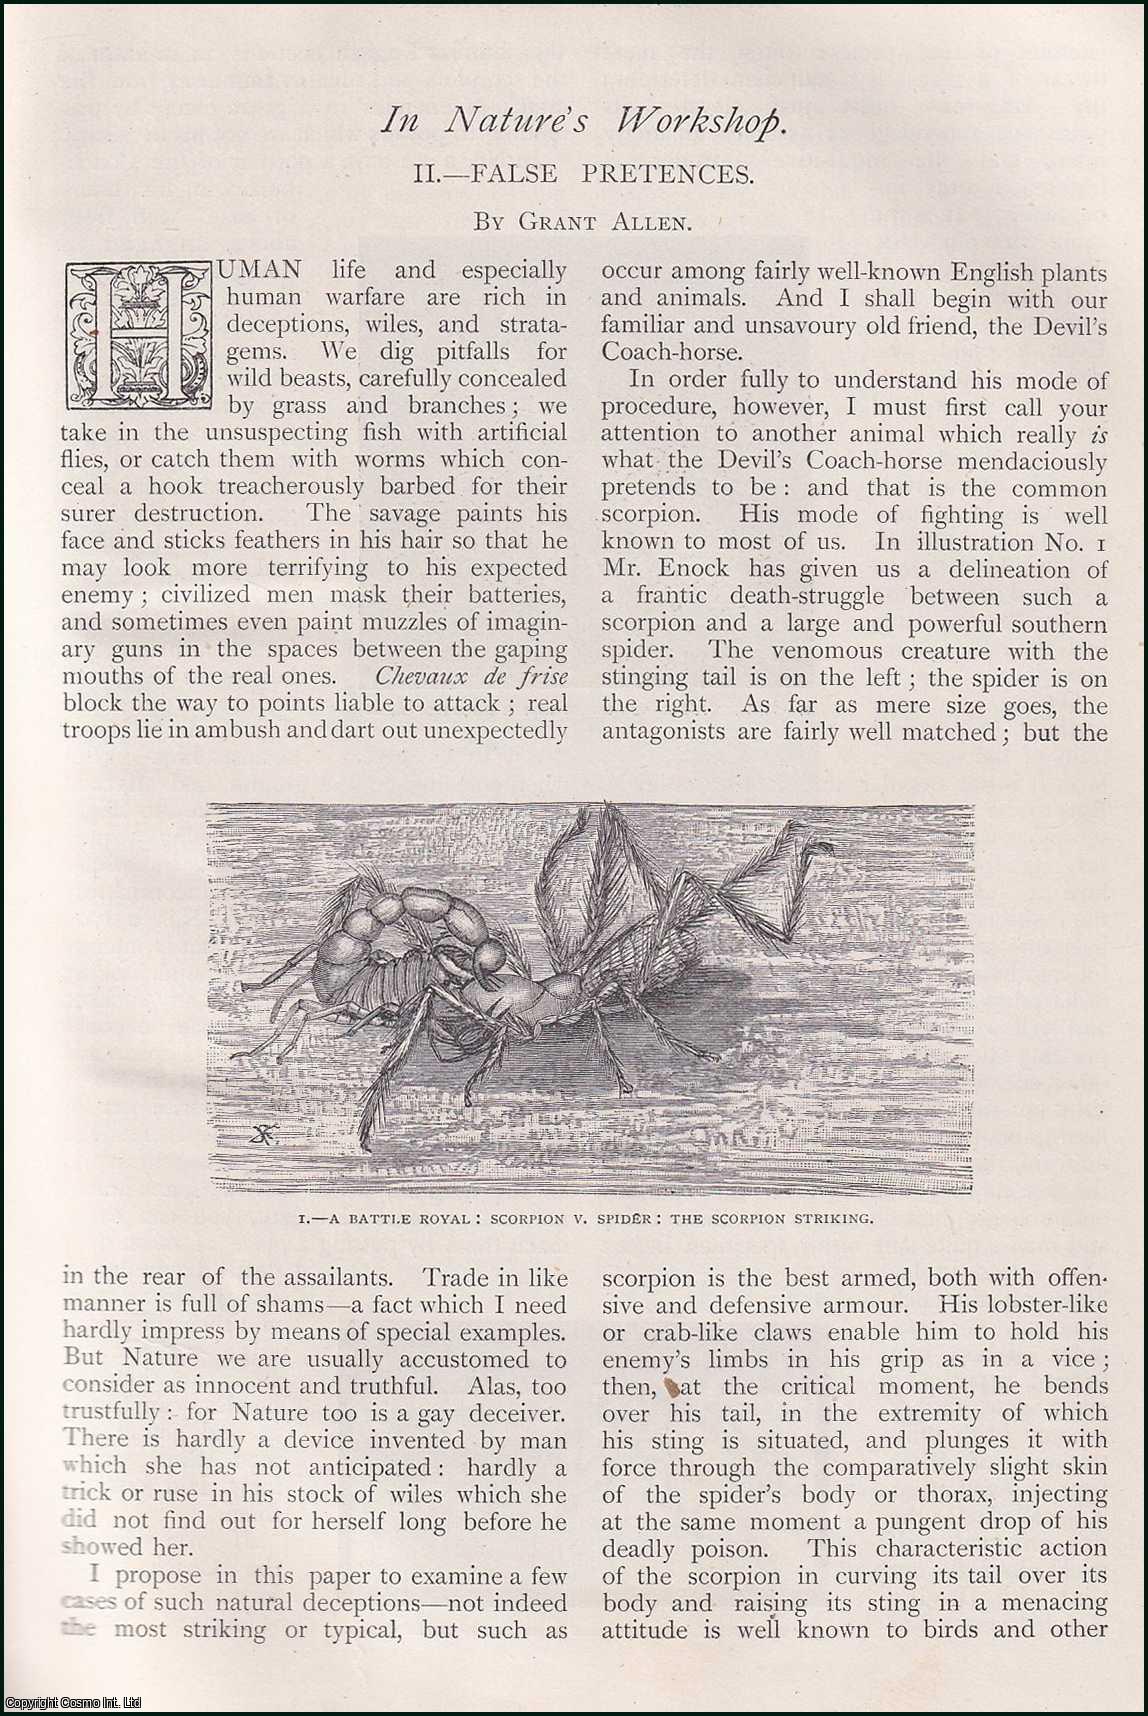 Grant Allen - False Pretences : insects. An uncommon original article from The Strand Magazine, 1899.